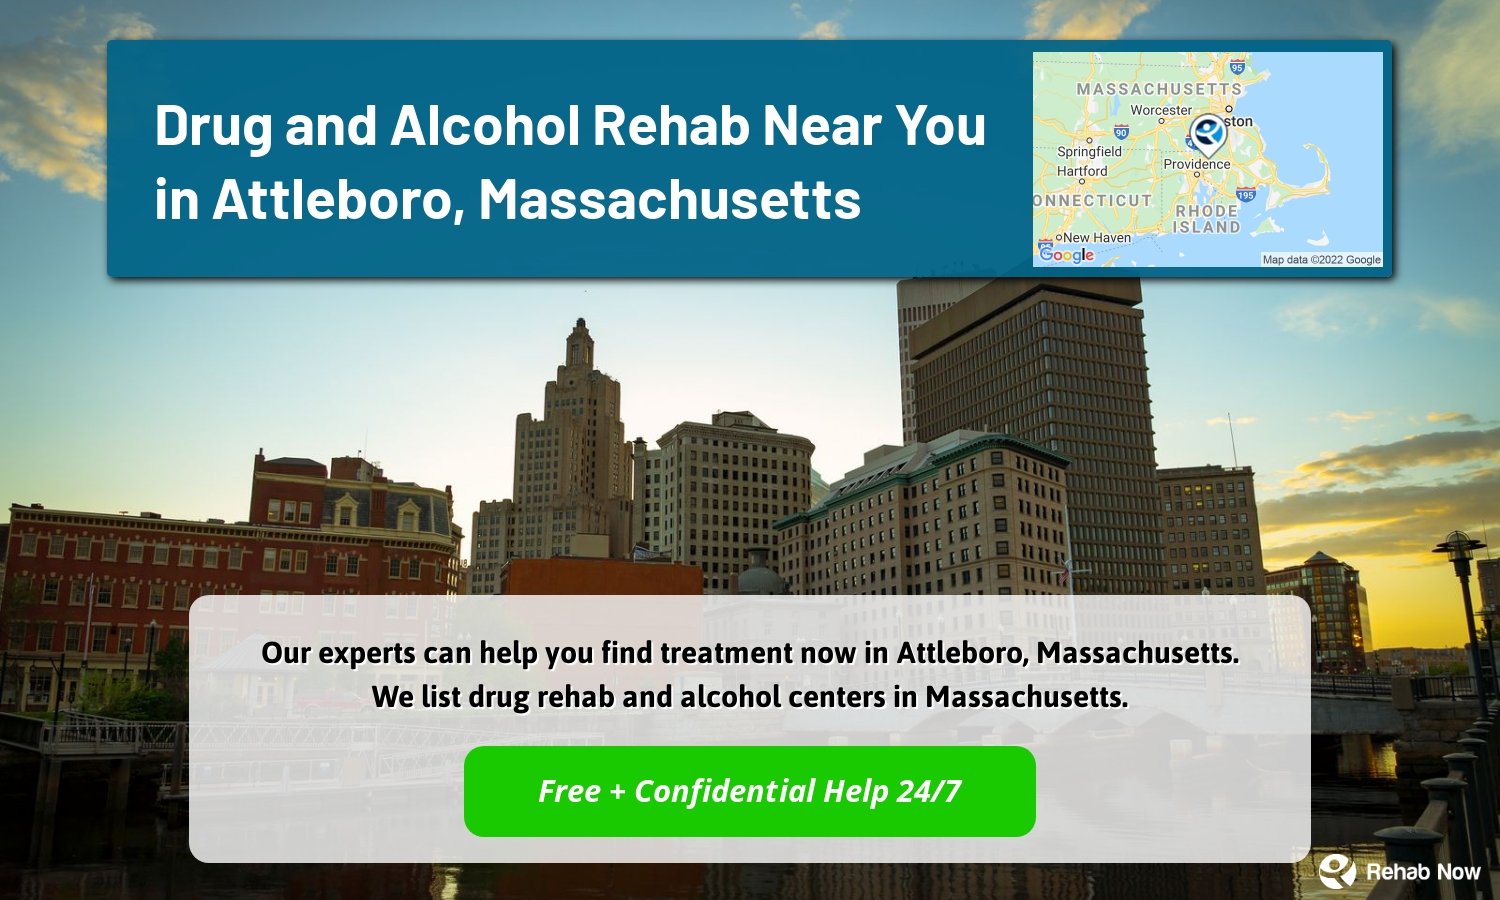 Our experts can help you find treatment now in Attleboro, Massachusetts. We list drug rehab and alcohol centers in Massachusetts.